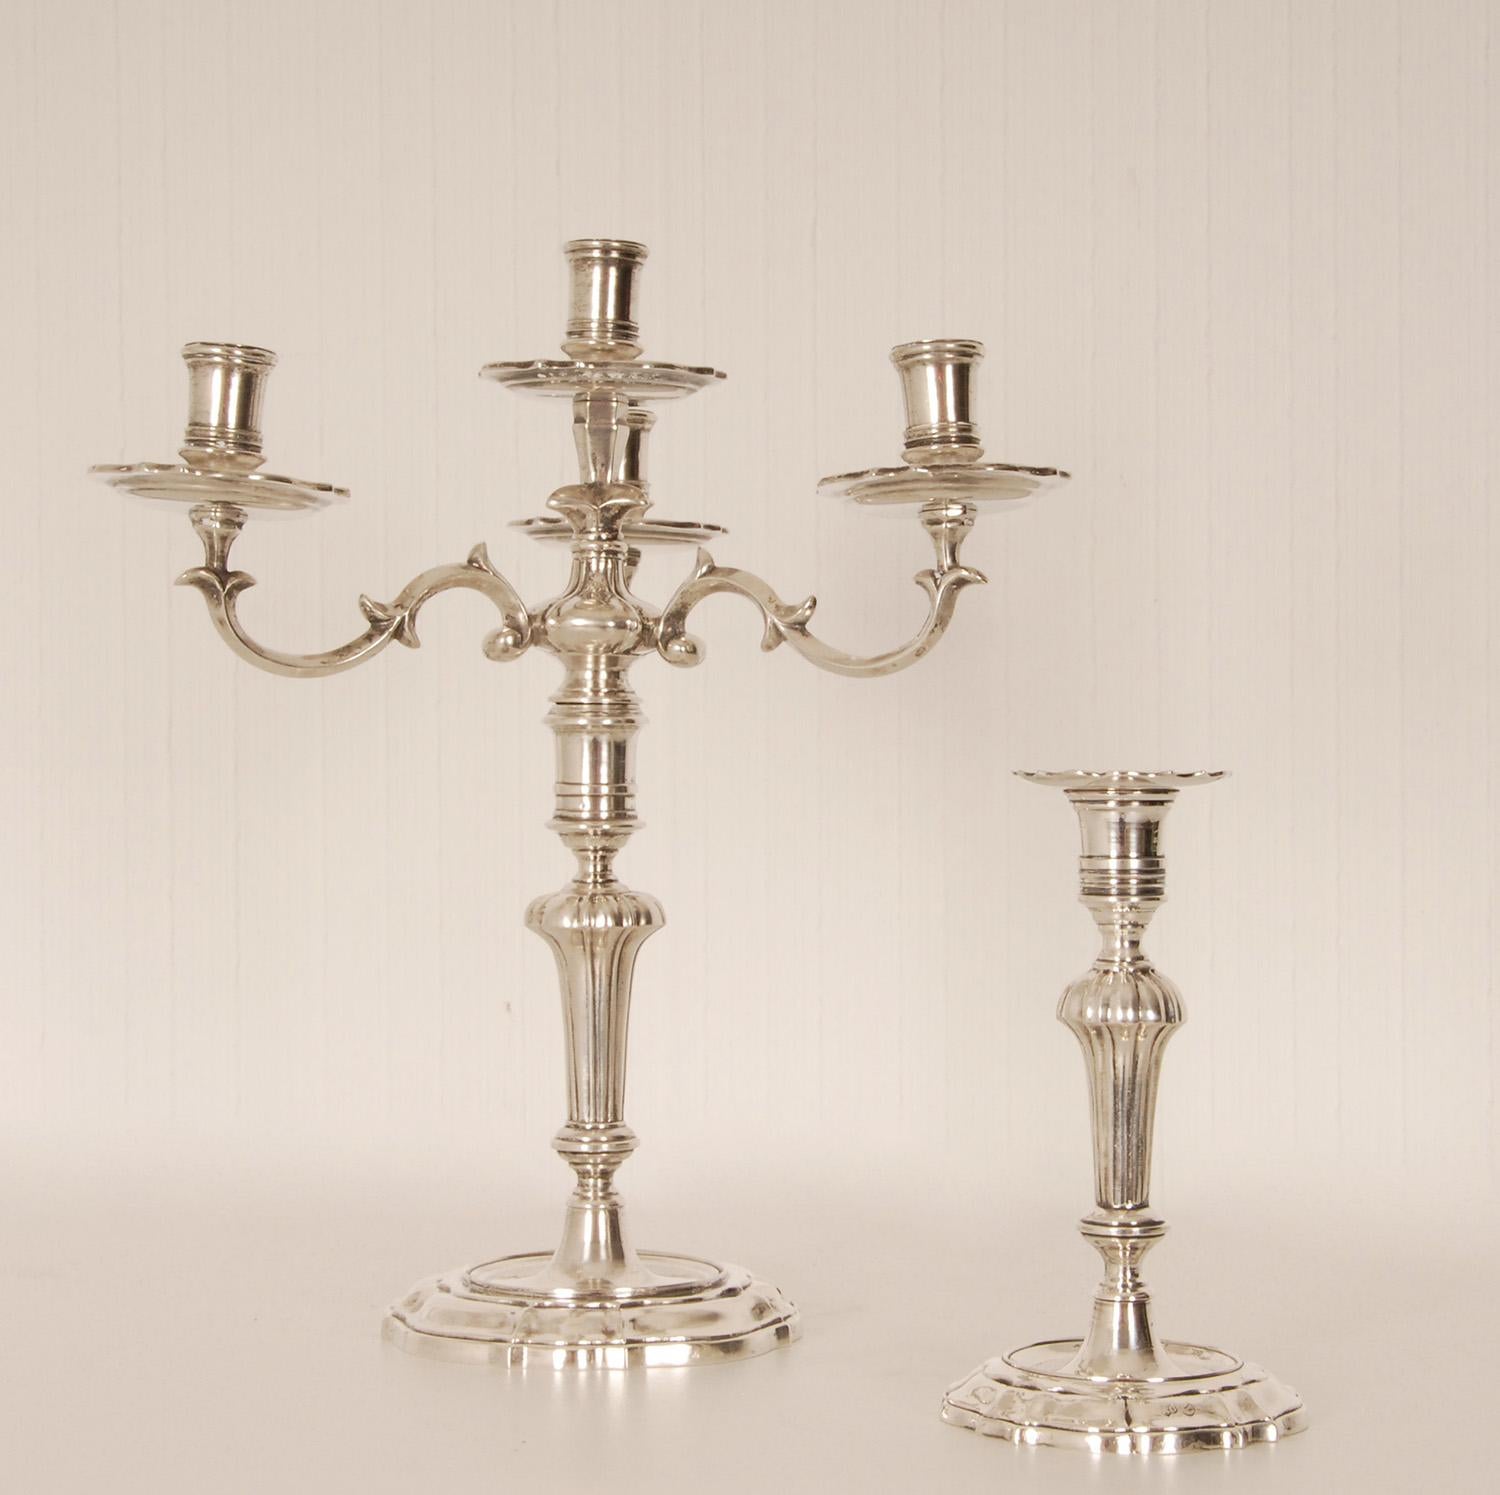 18th Century Italian Candelabra Rococo Sterling Silver Candlesticks Venice pair For Sale 5